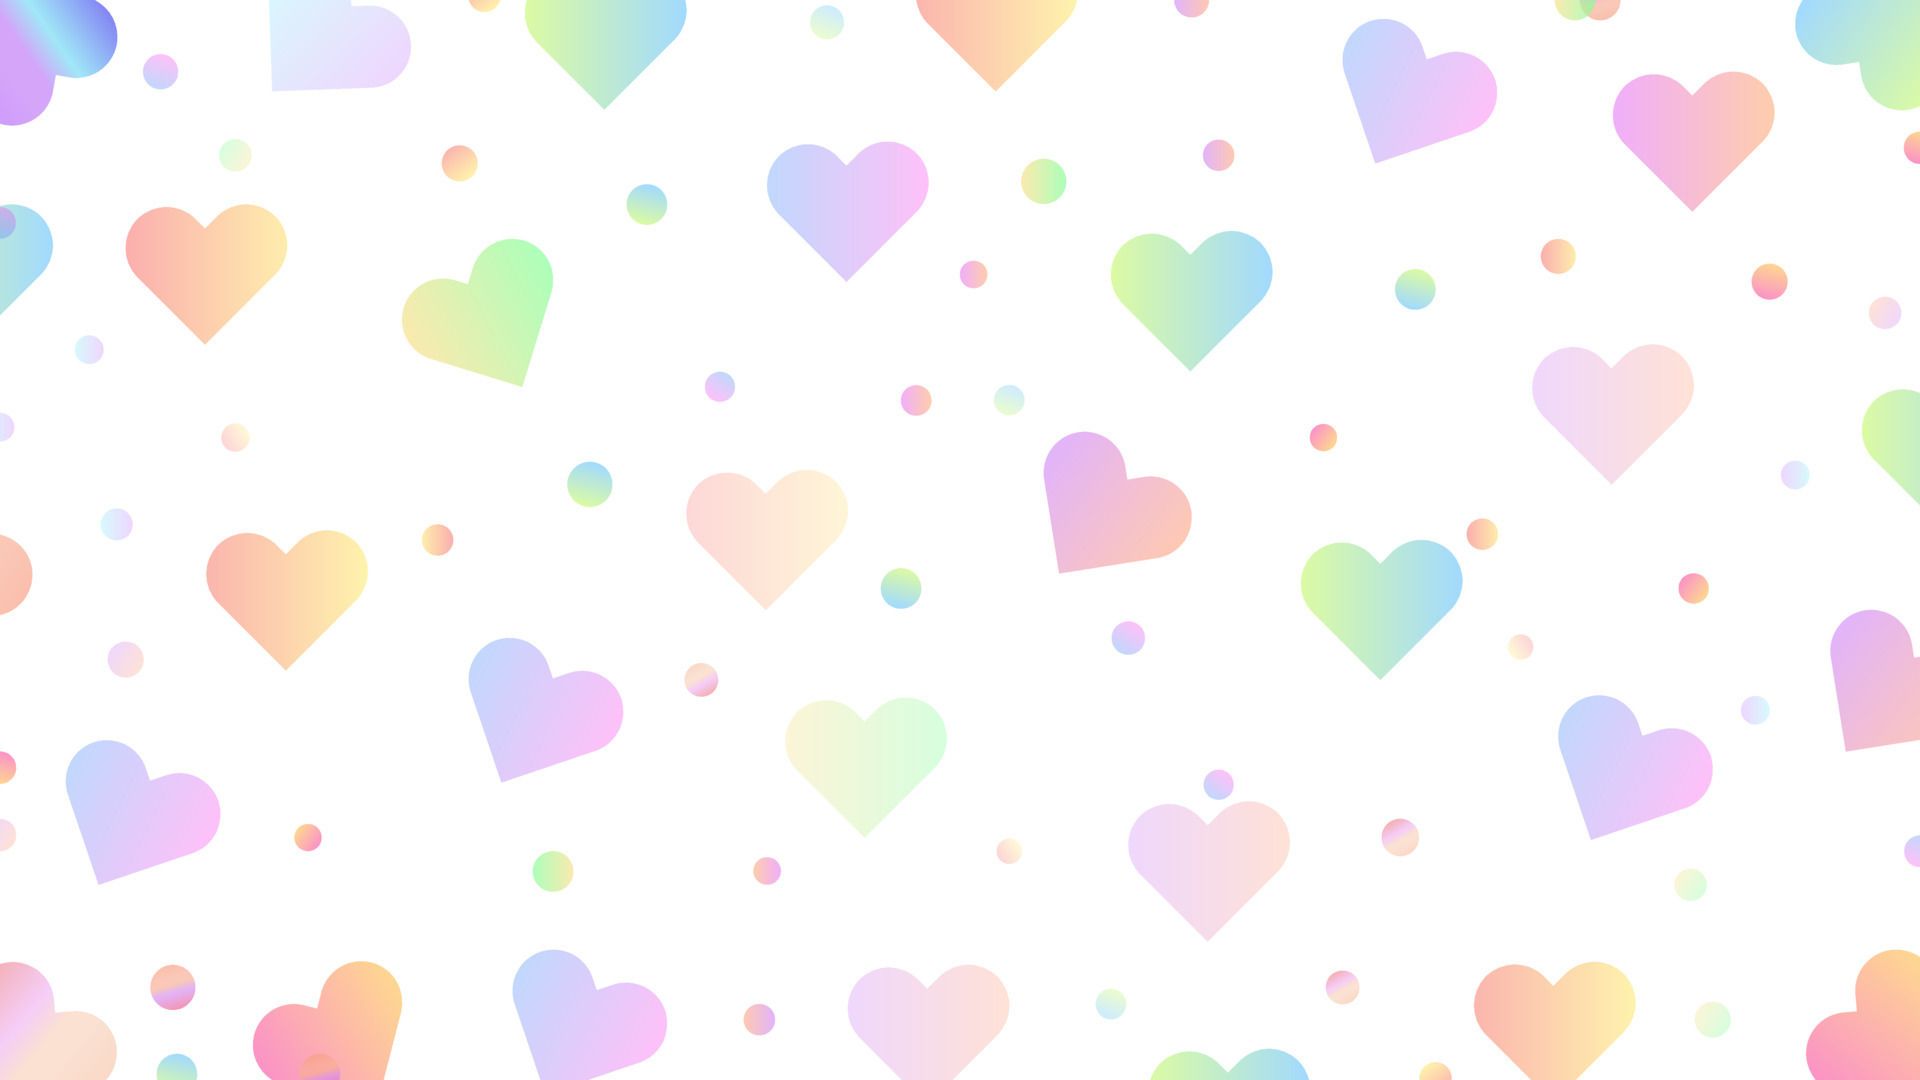 A pattern of hearts in different colors - Pink heart